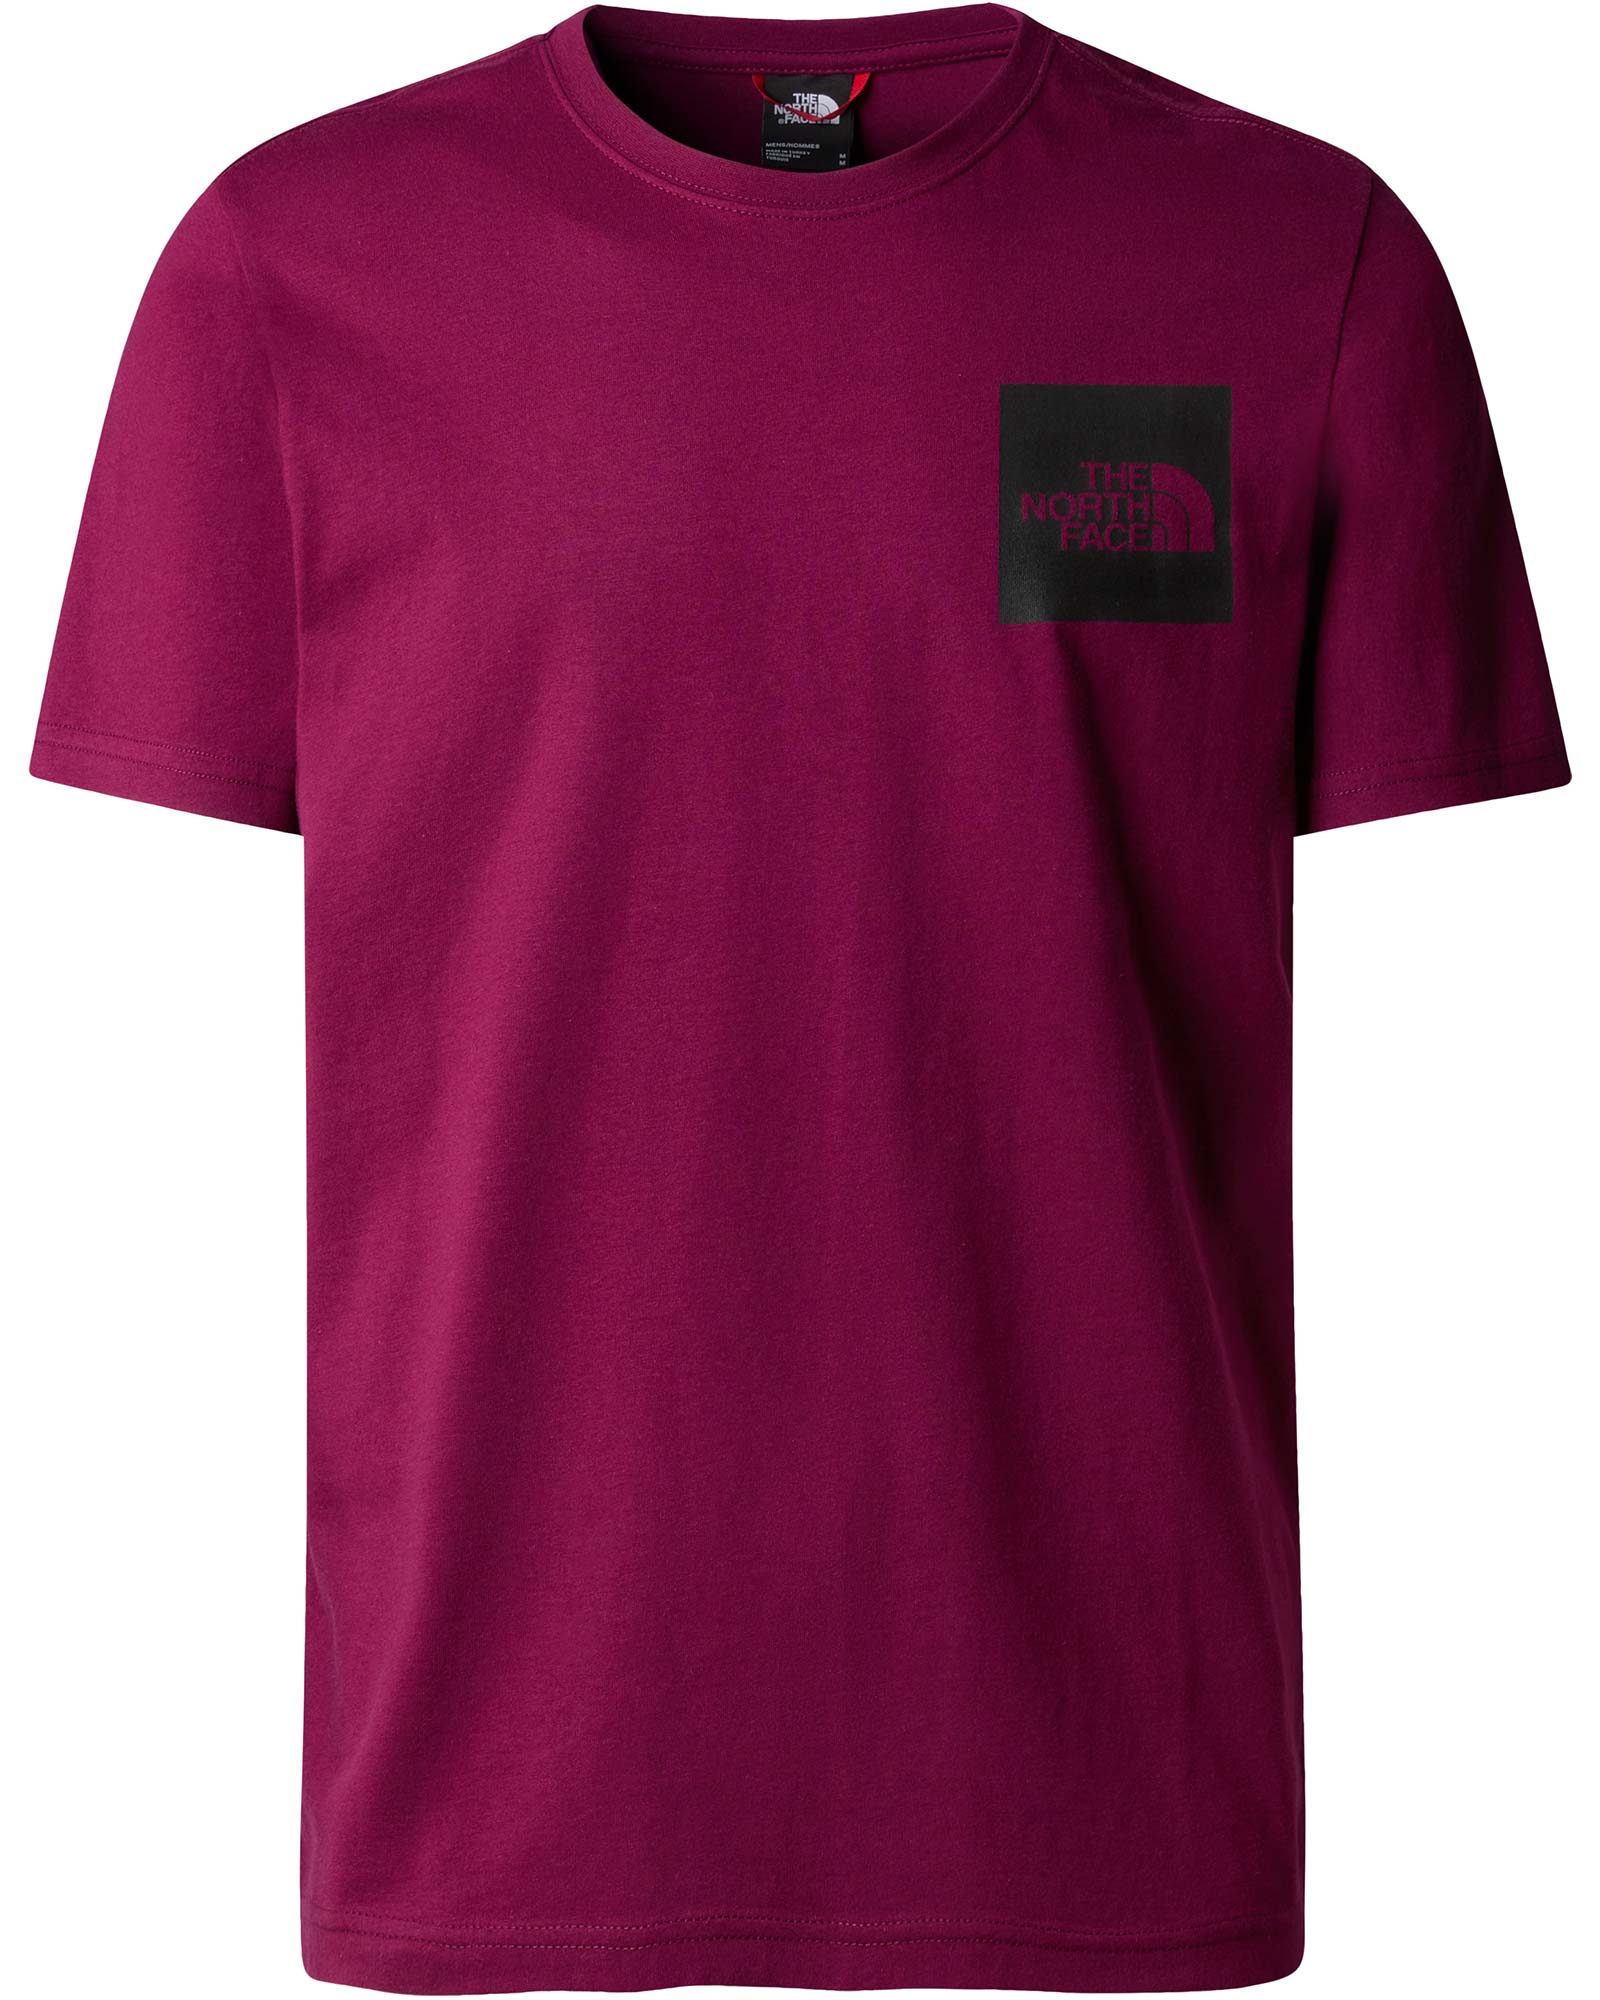 The North Face Fine Men’s Tee - Boysenberry S